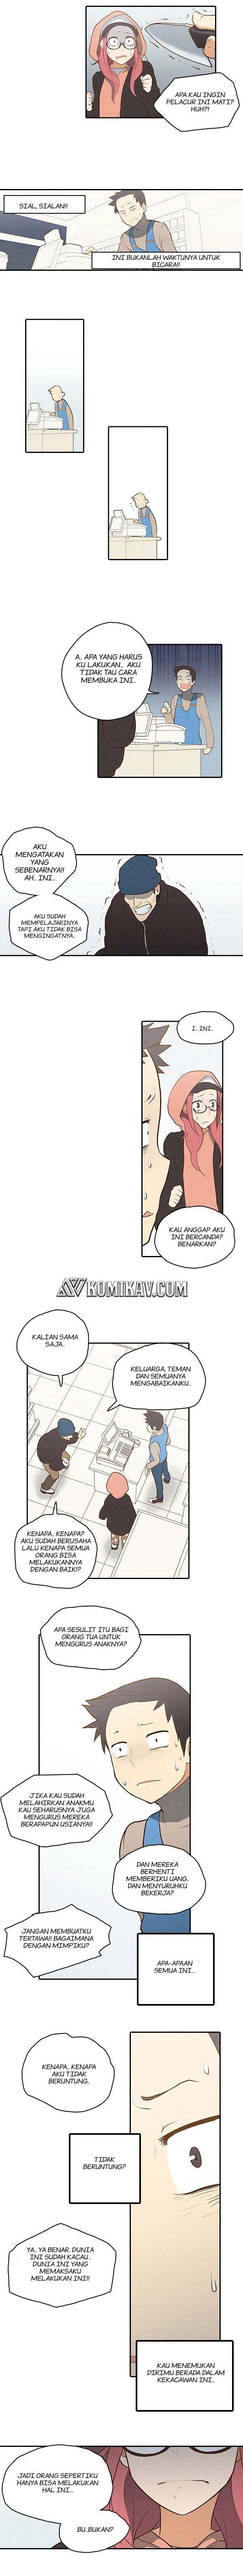 How to Open a Triangular Riceball Chapter 21